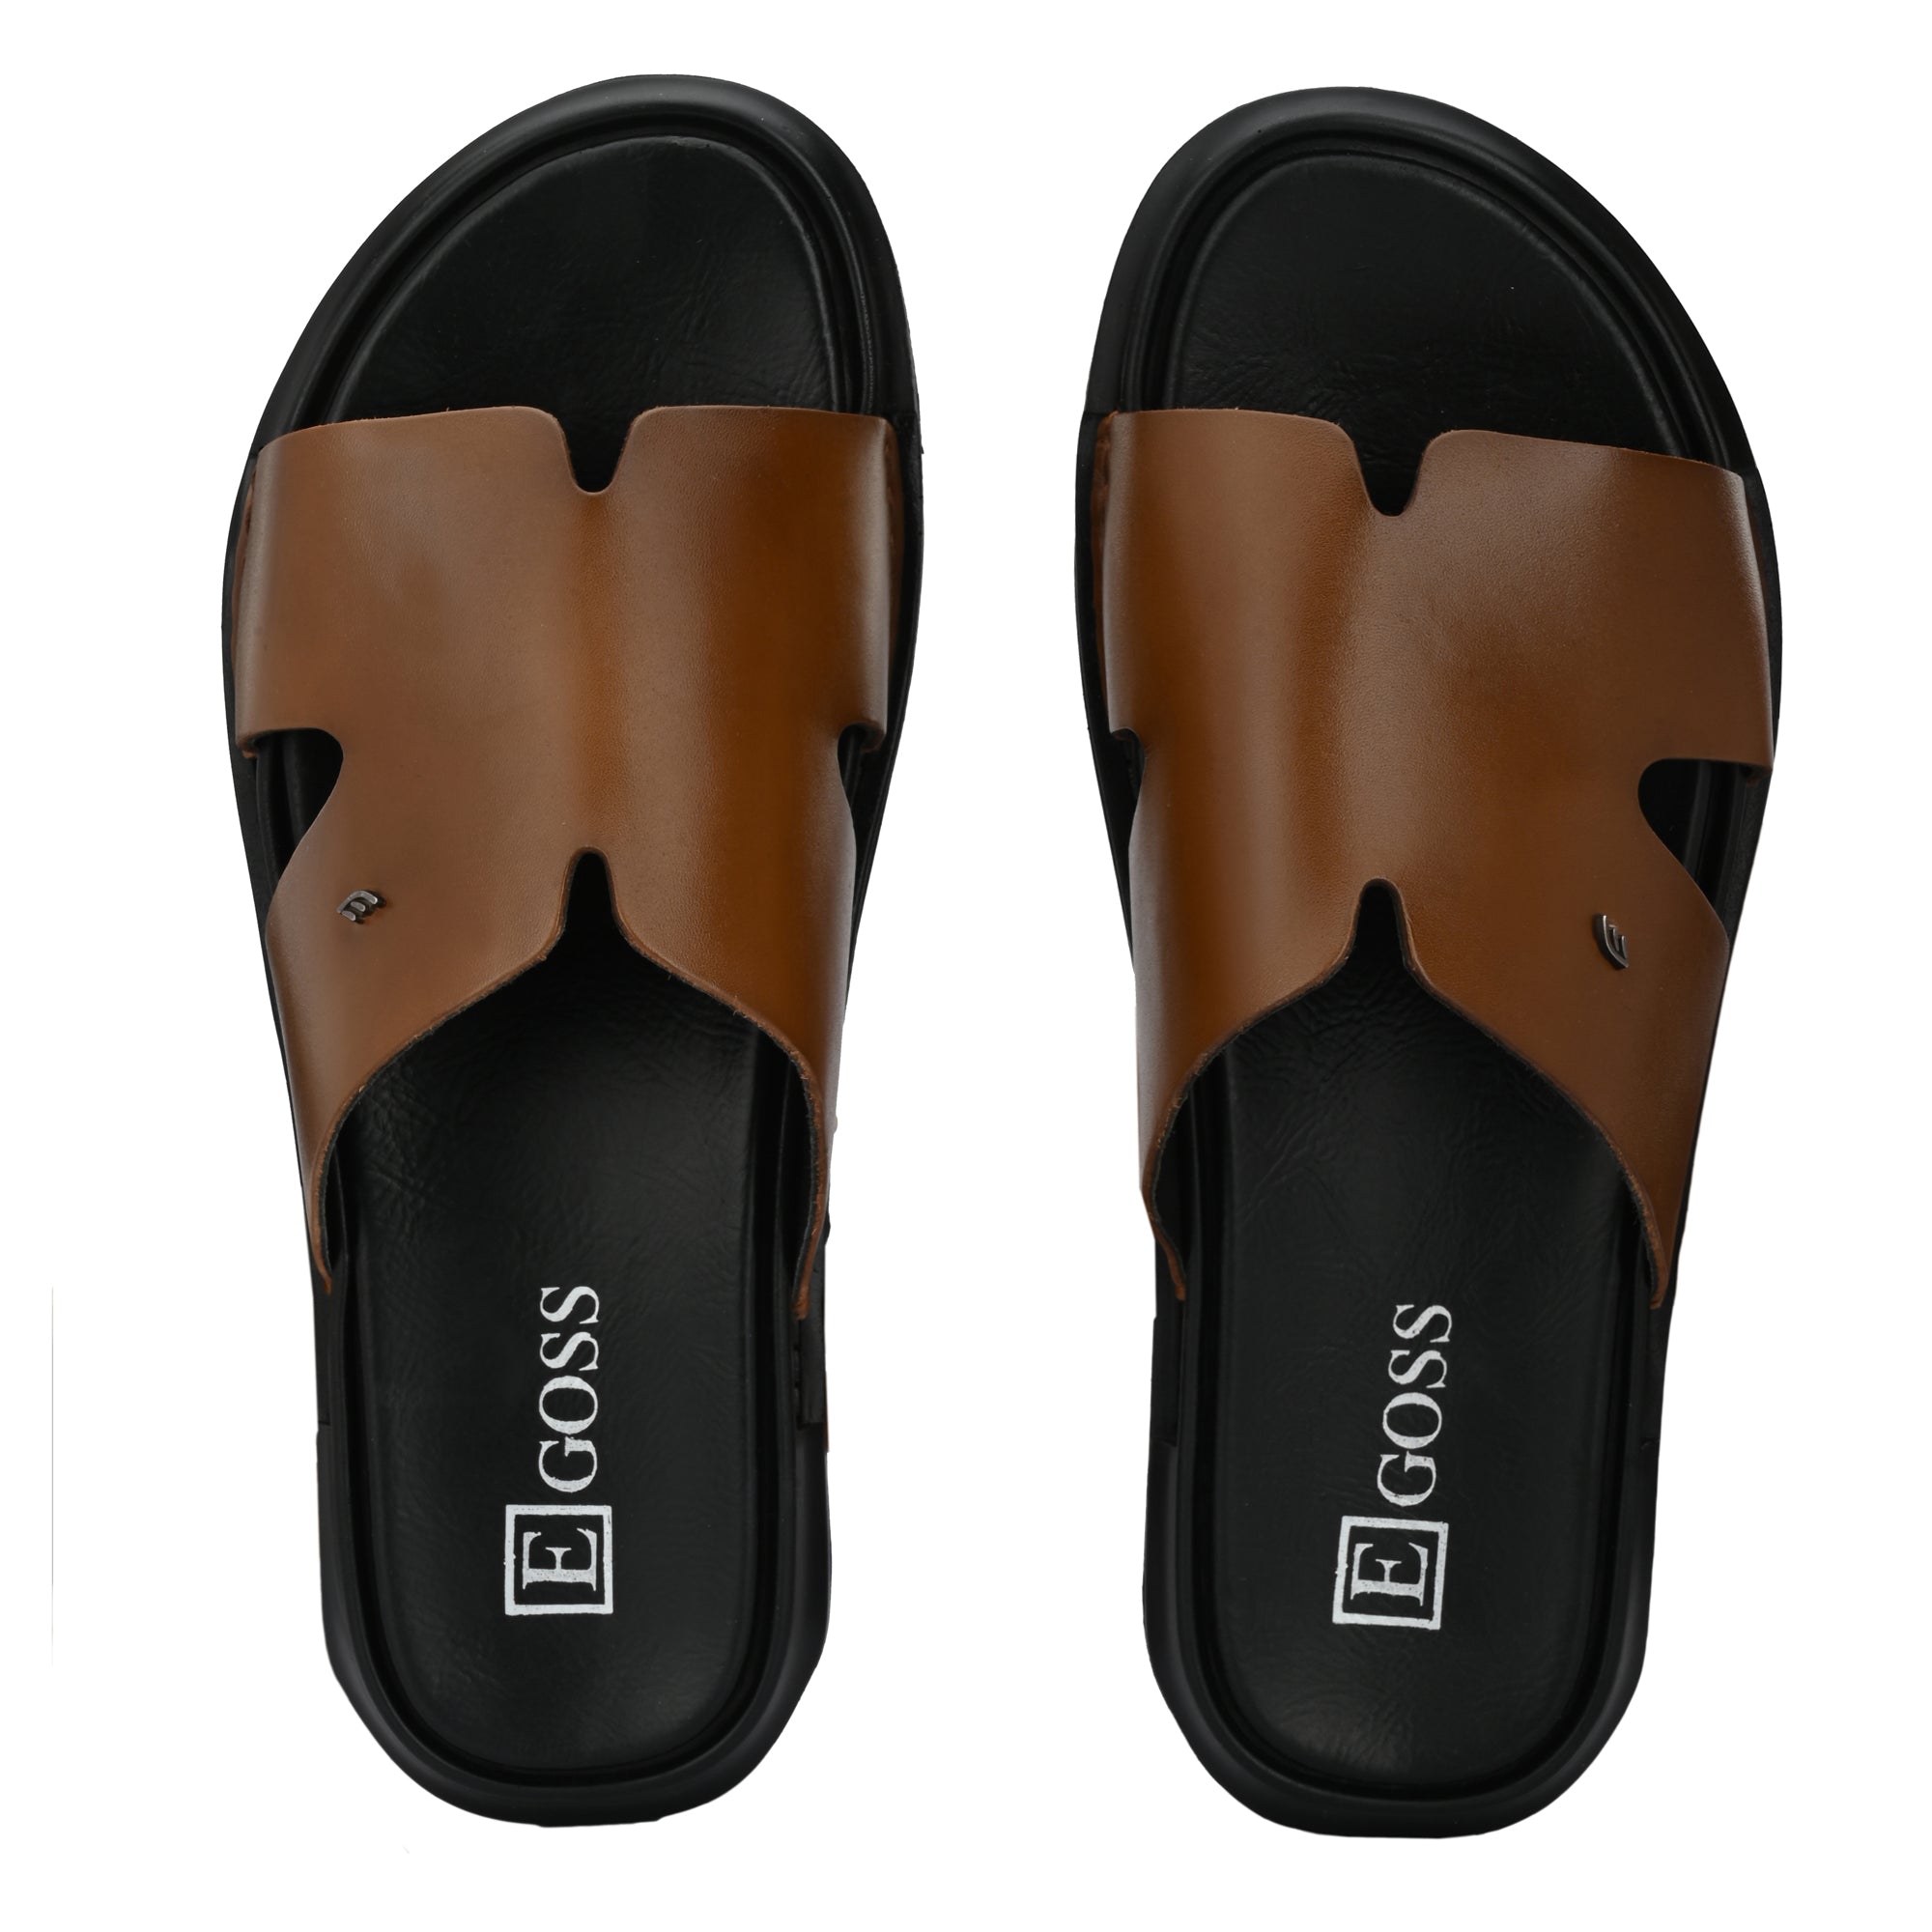 Leather Slippers for men